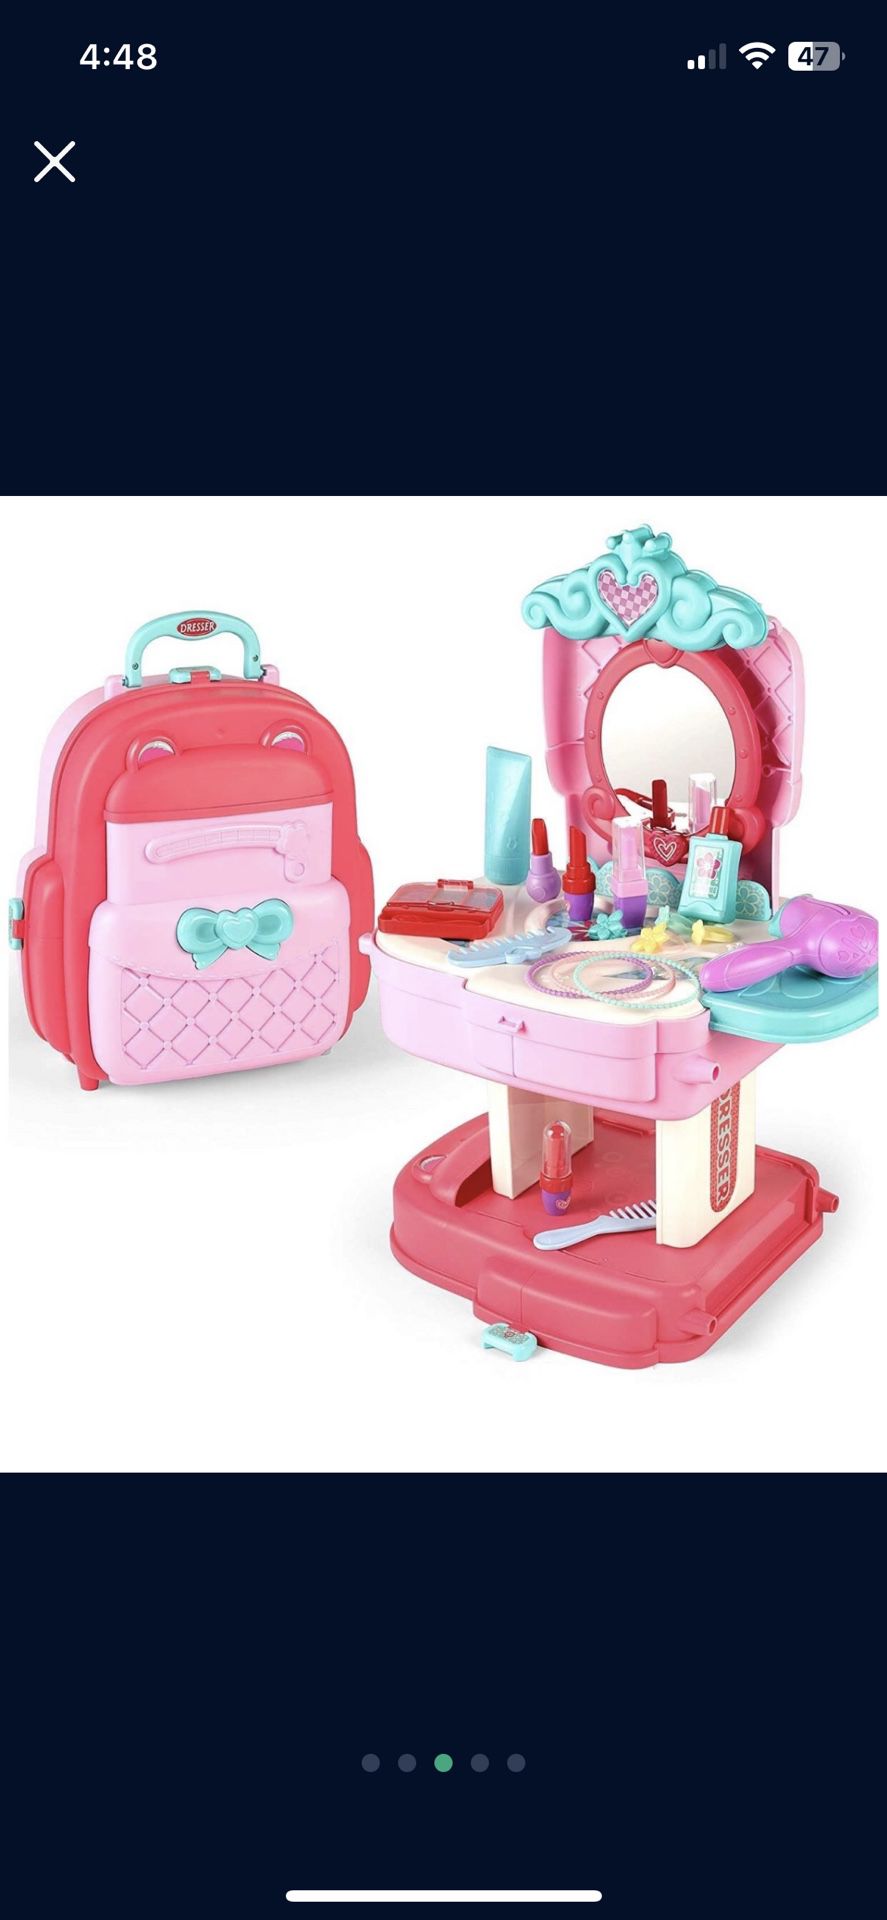 30 Pcs Role Play Educational Make Up Kit And Vanity With 2-in-1 Carrier Backpack For Toddlers